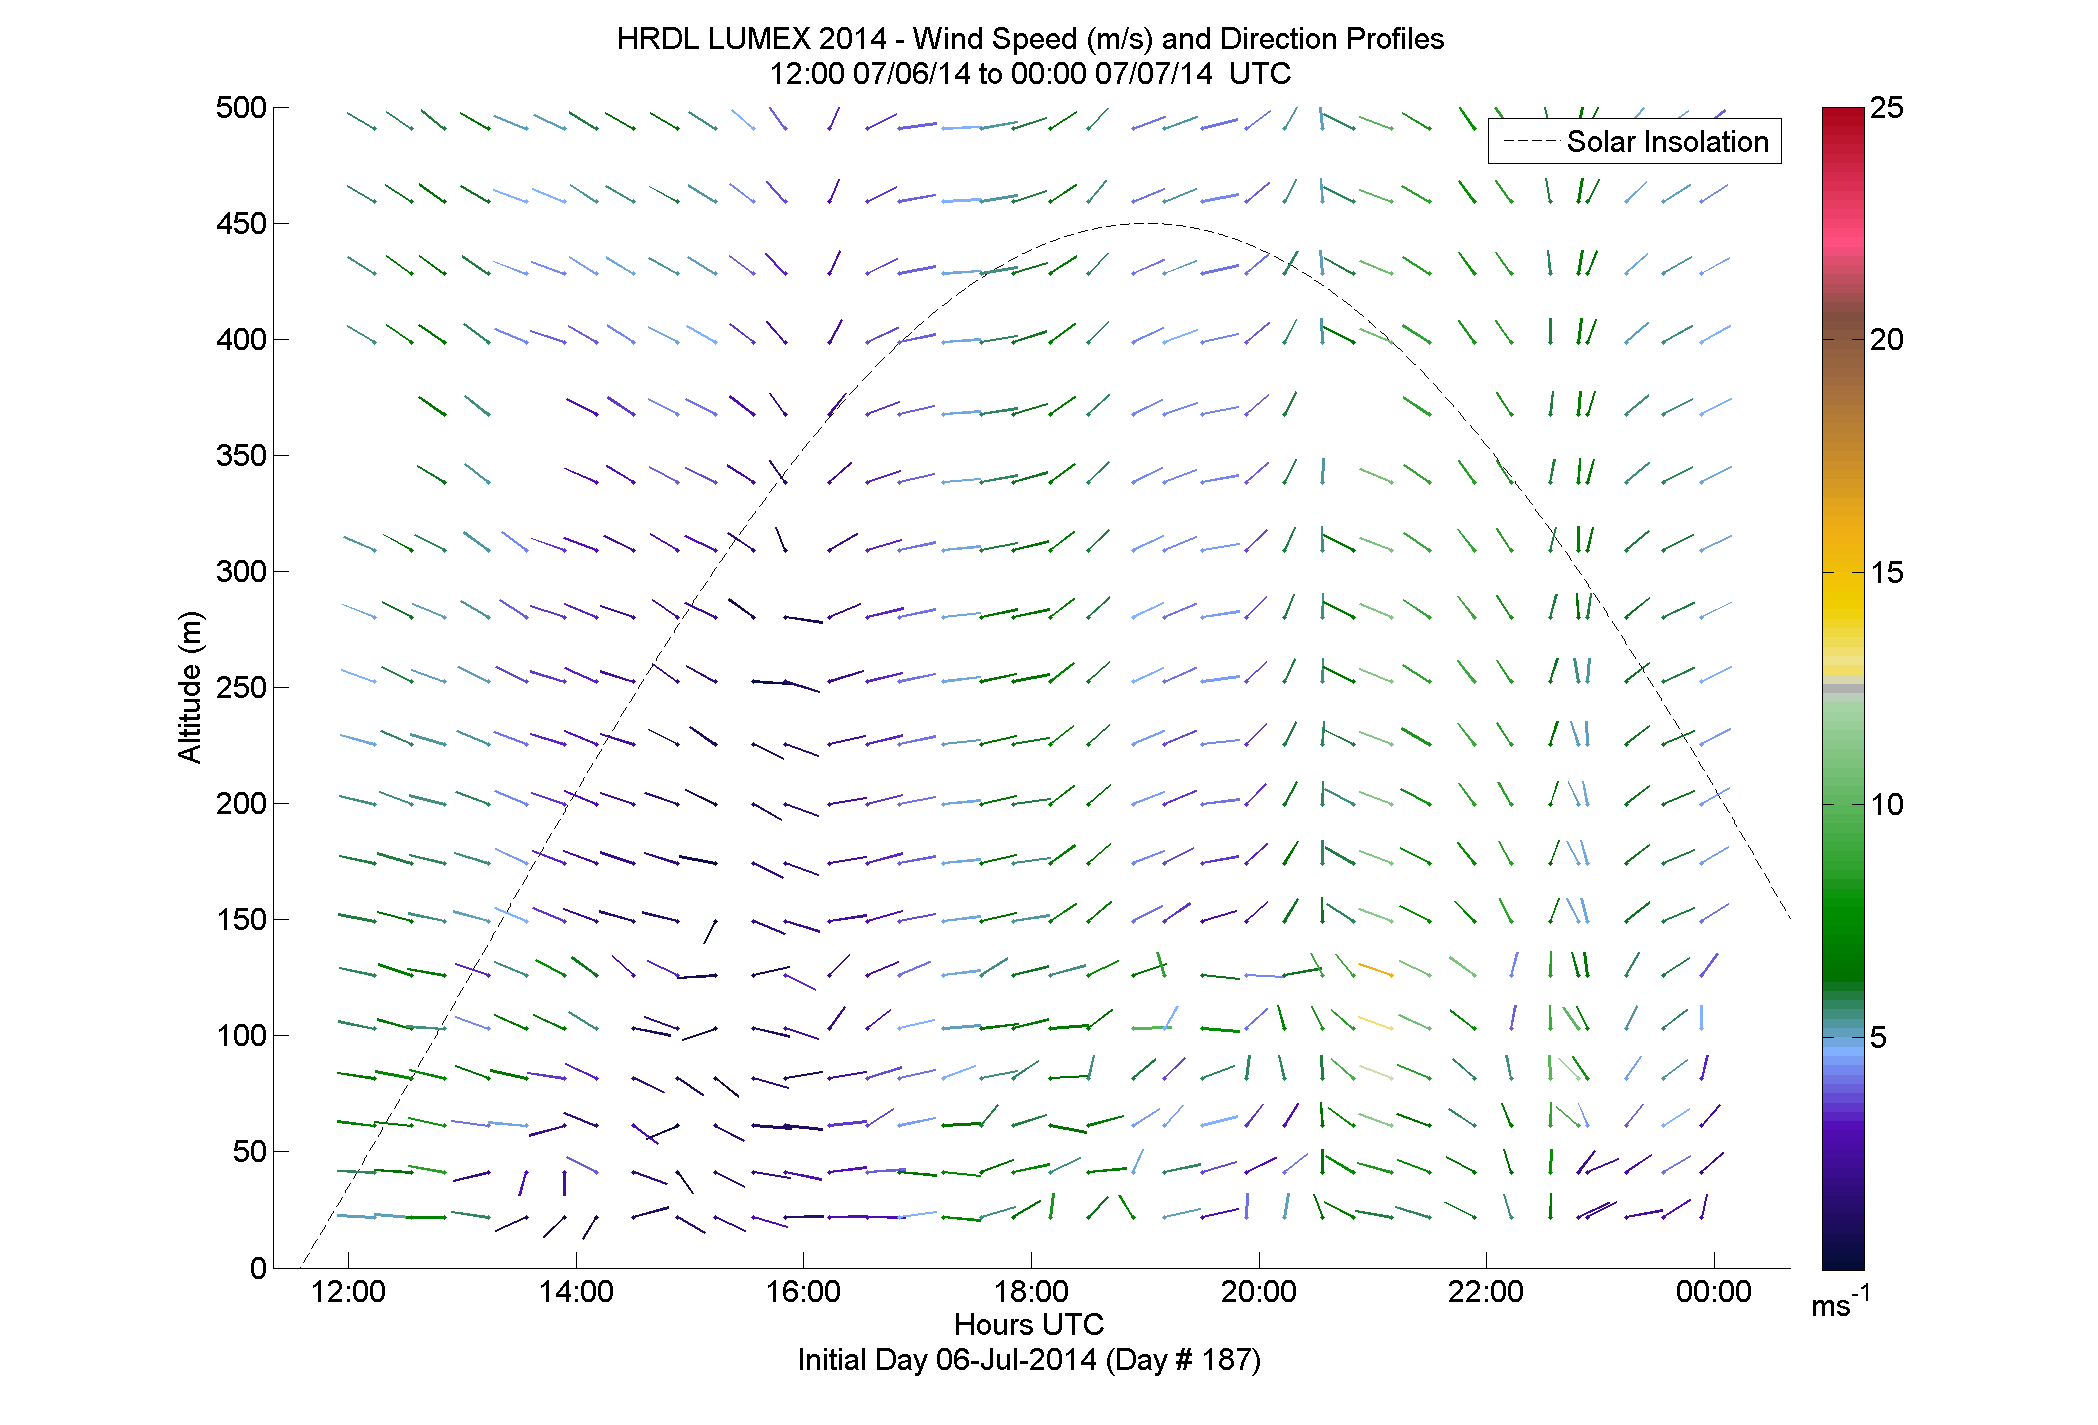 HRDL speed and direction profile - July 6 pm